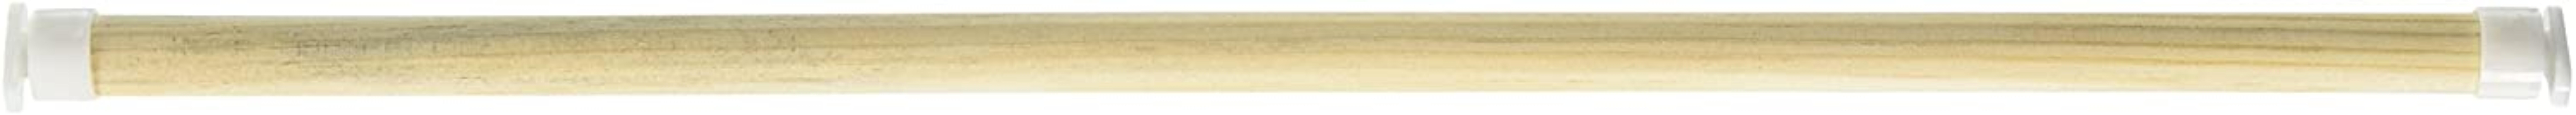 Prevue Pet Products BPV374 2-Pack Birdie Basics Wood Bird Perch 3/8 by 19-Inch 